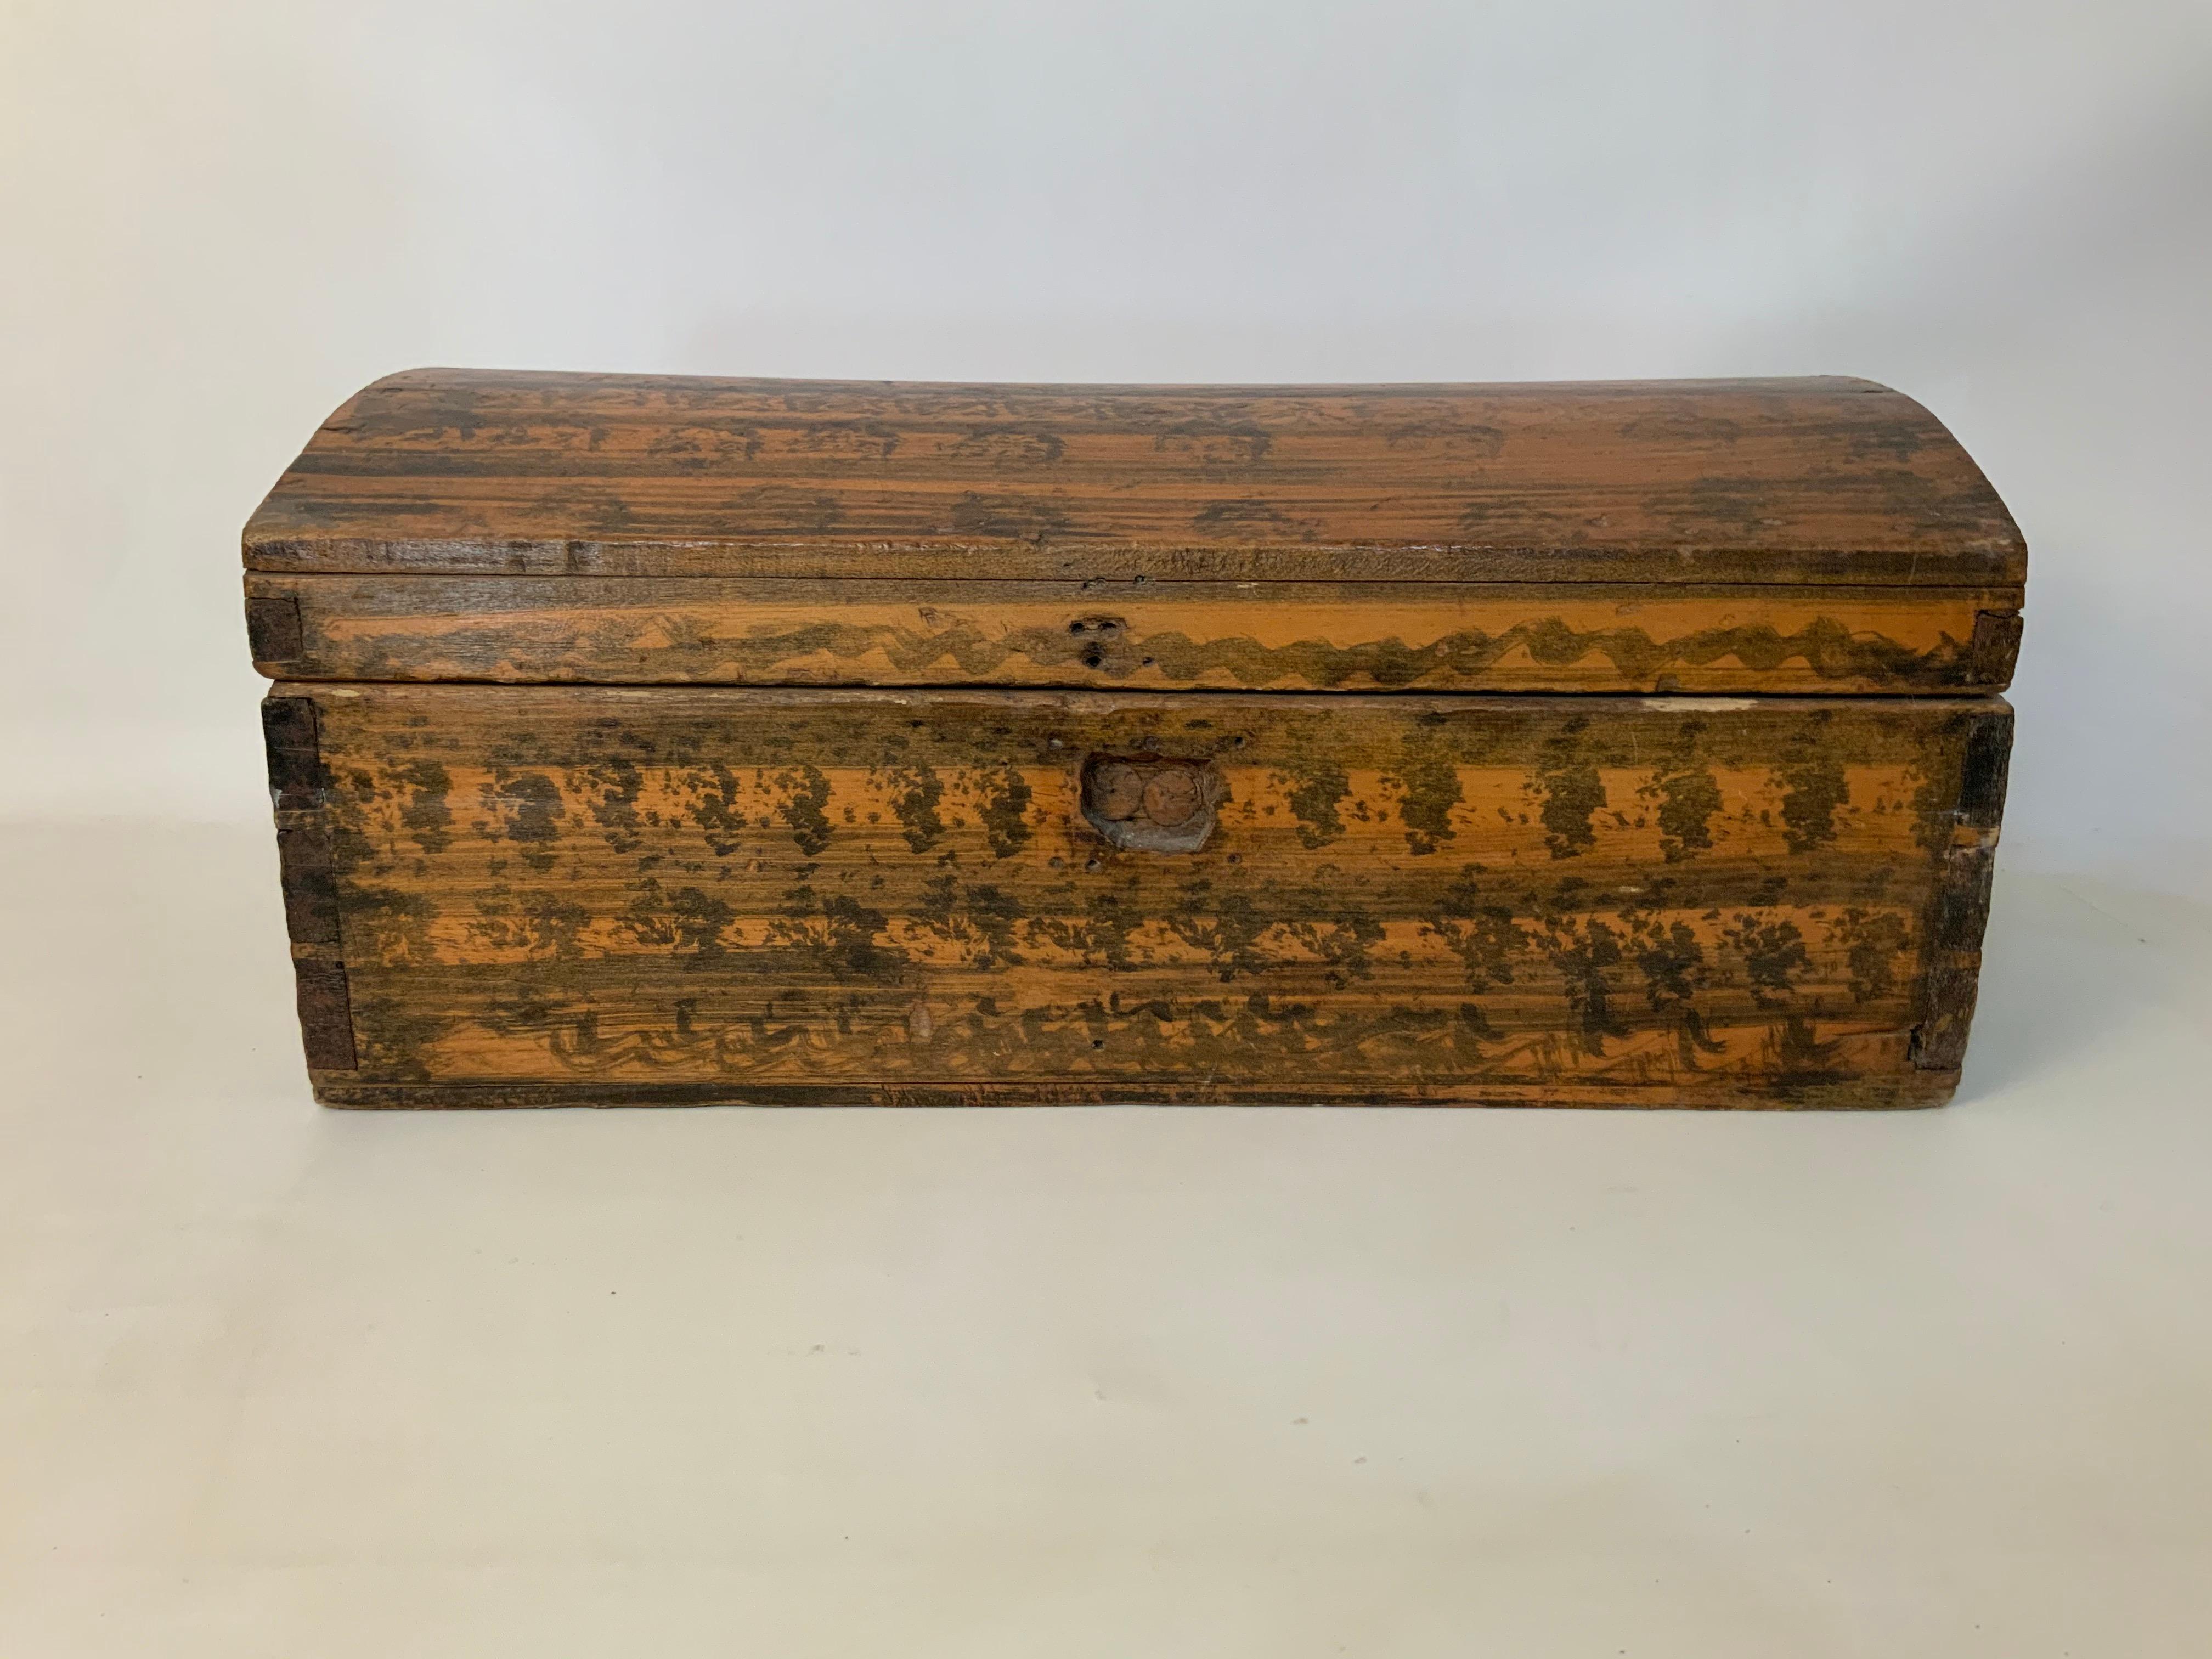 Small dome top 19th century American sponge painted and faux grained trunk. Trunks of this style often go by different names: humpback, dome top, camel back, etc. A wonderful piece of mid-19th century Americana. Pine wood substrate and decorated in